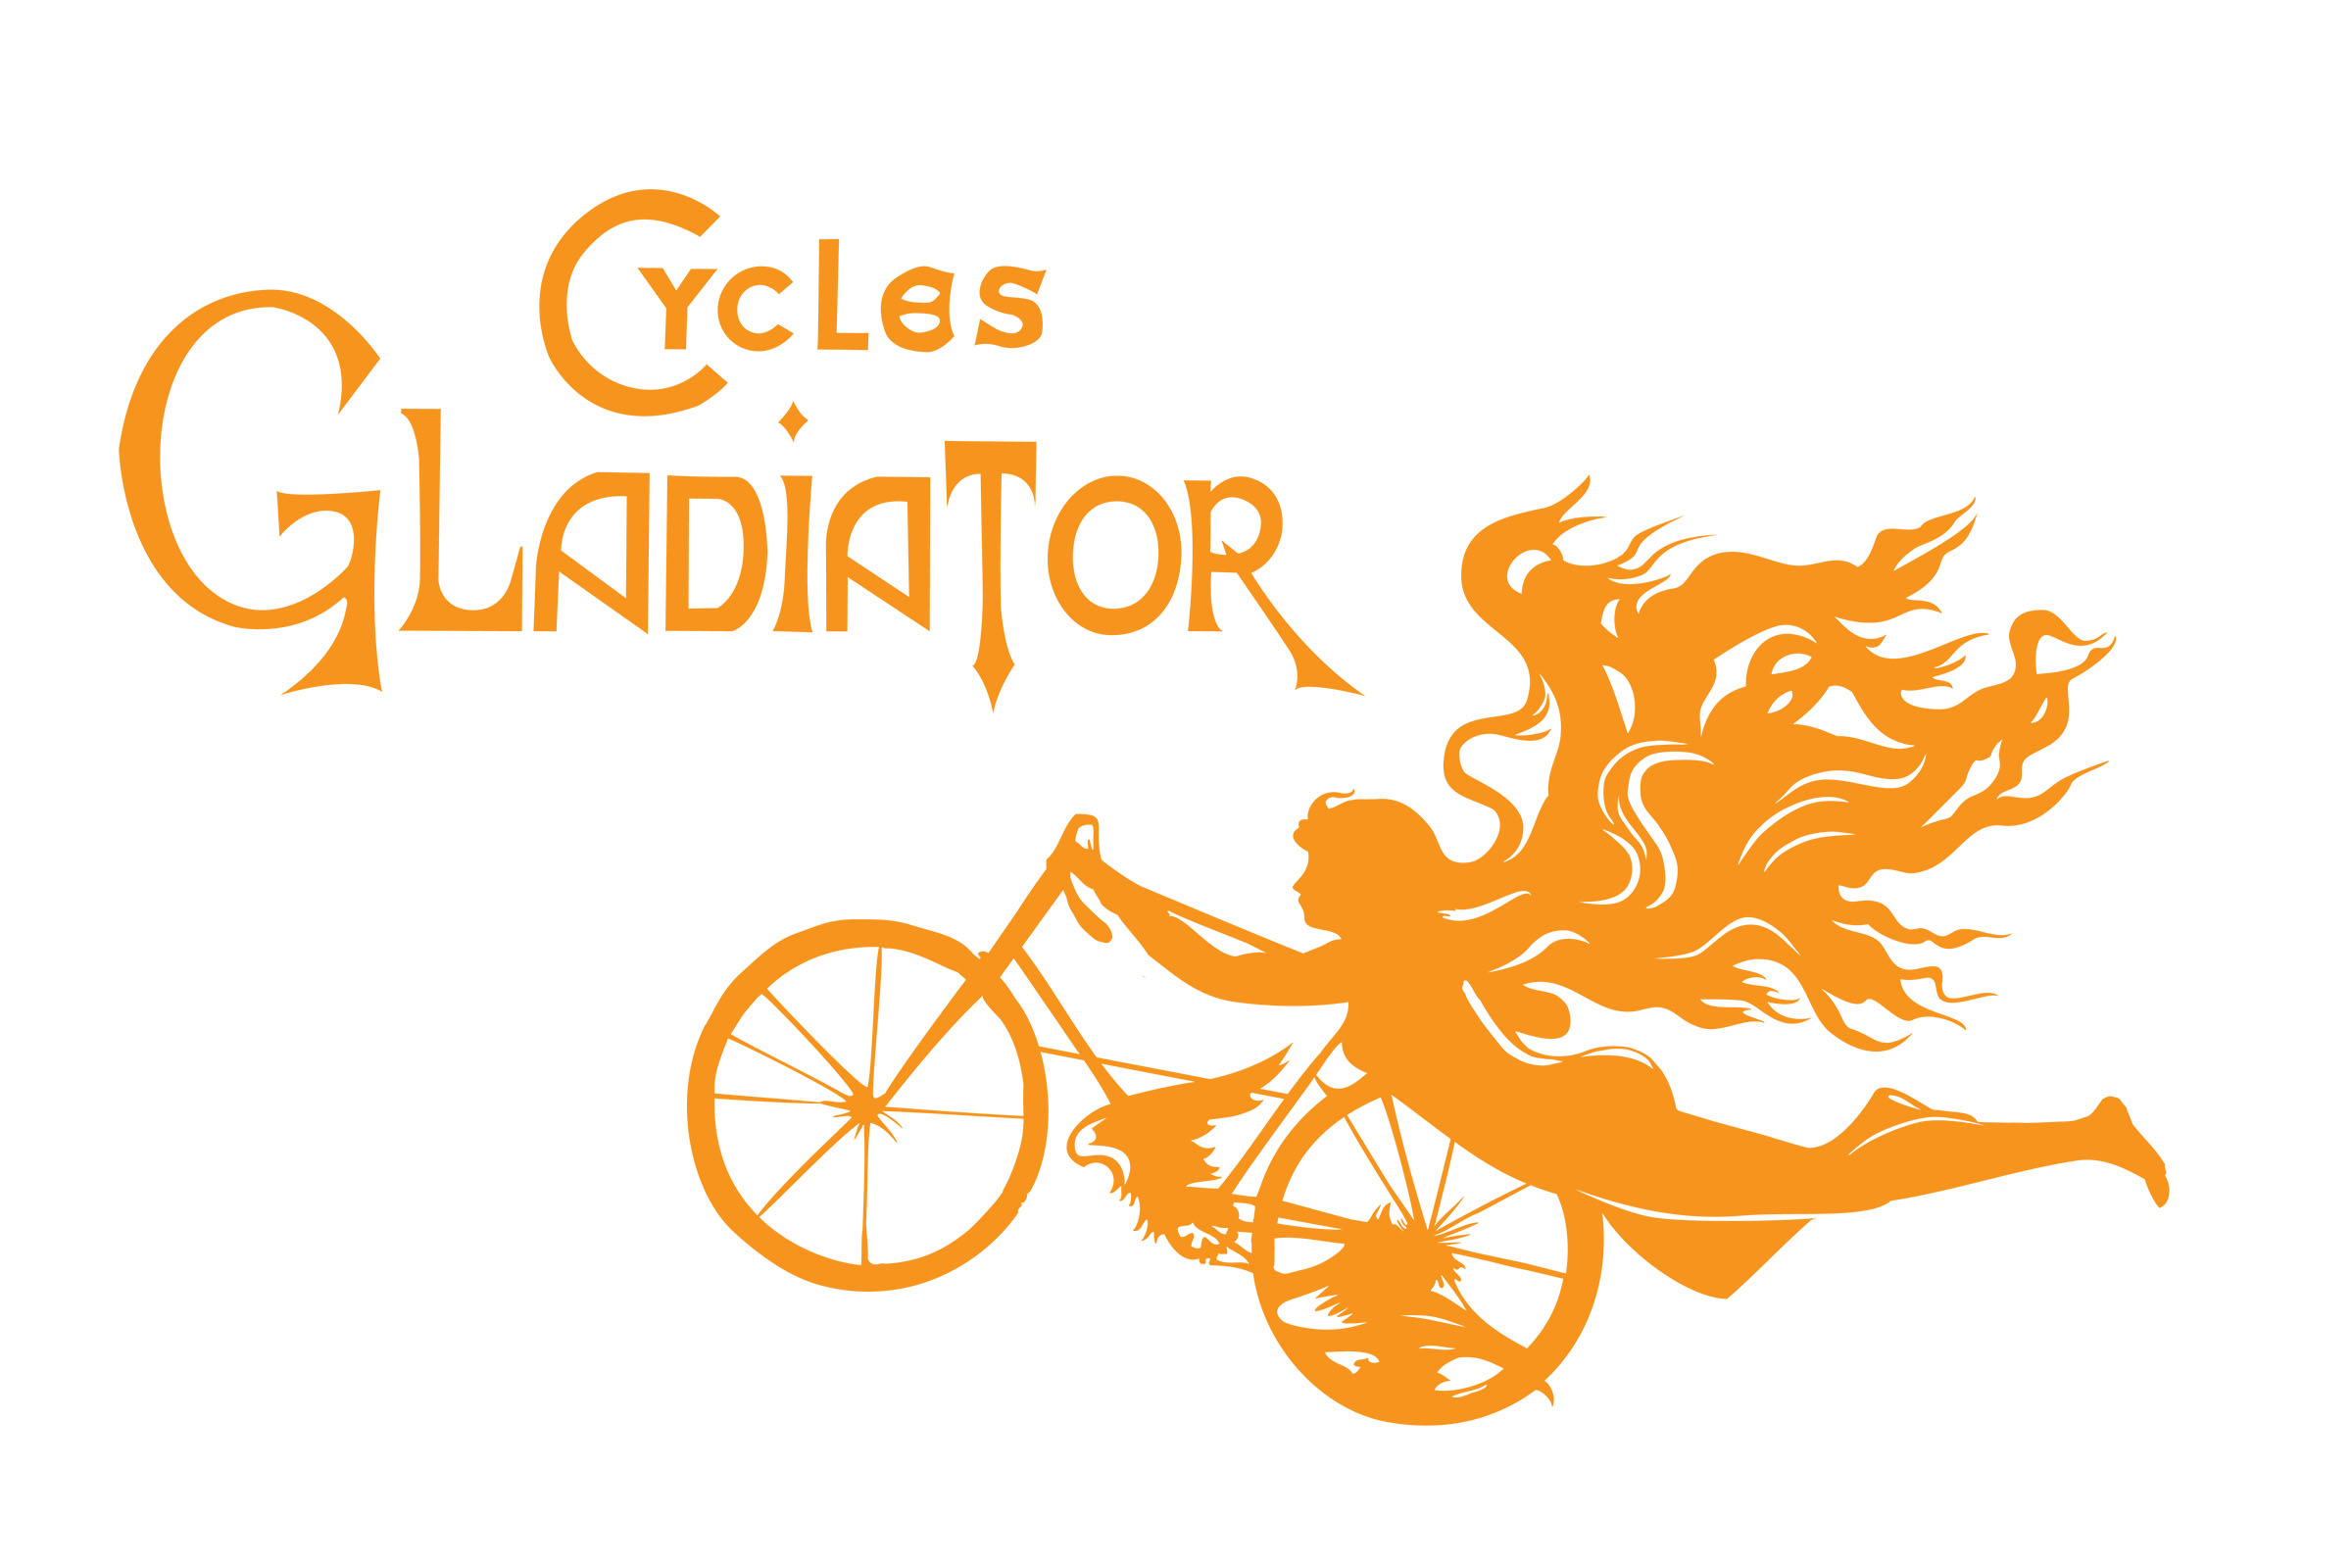 Cycles Gladiator sponsors Walls for Women